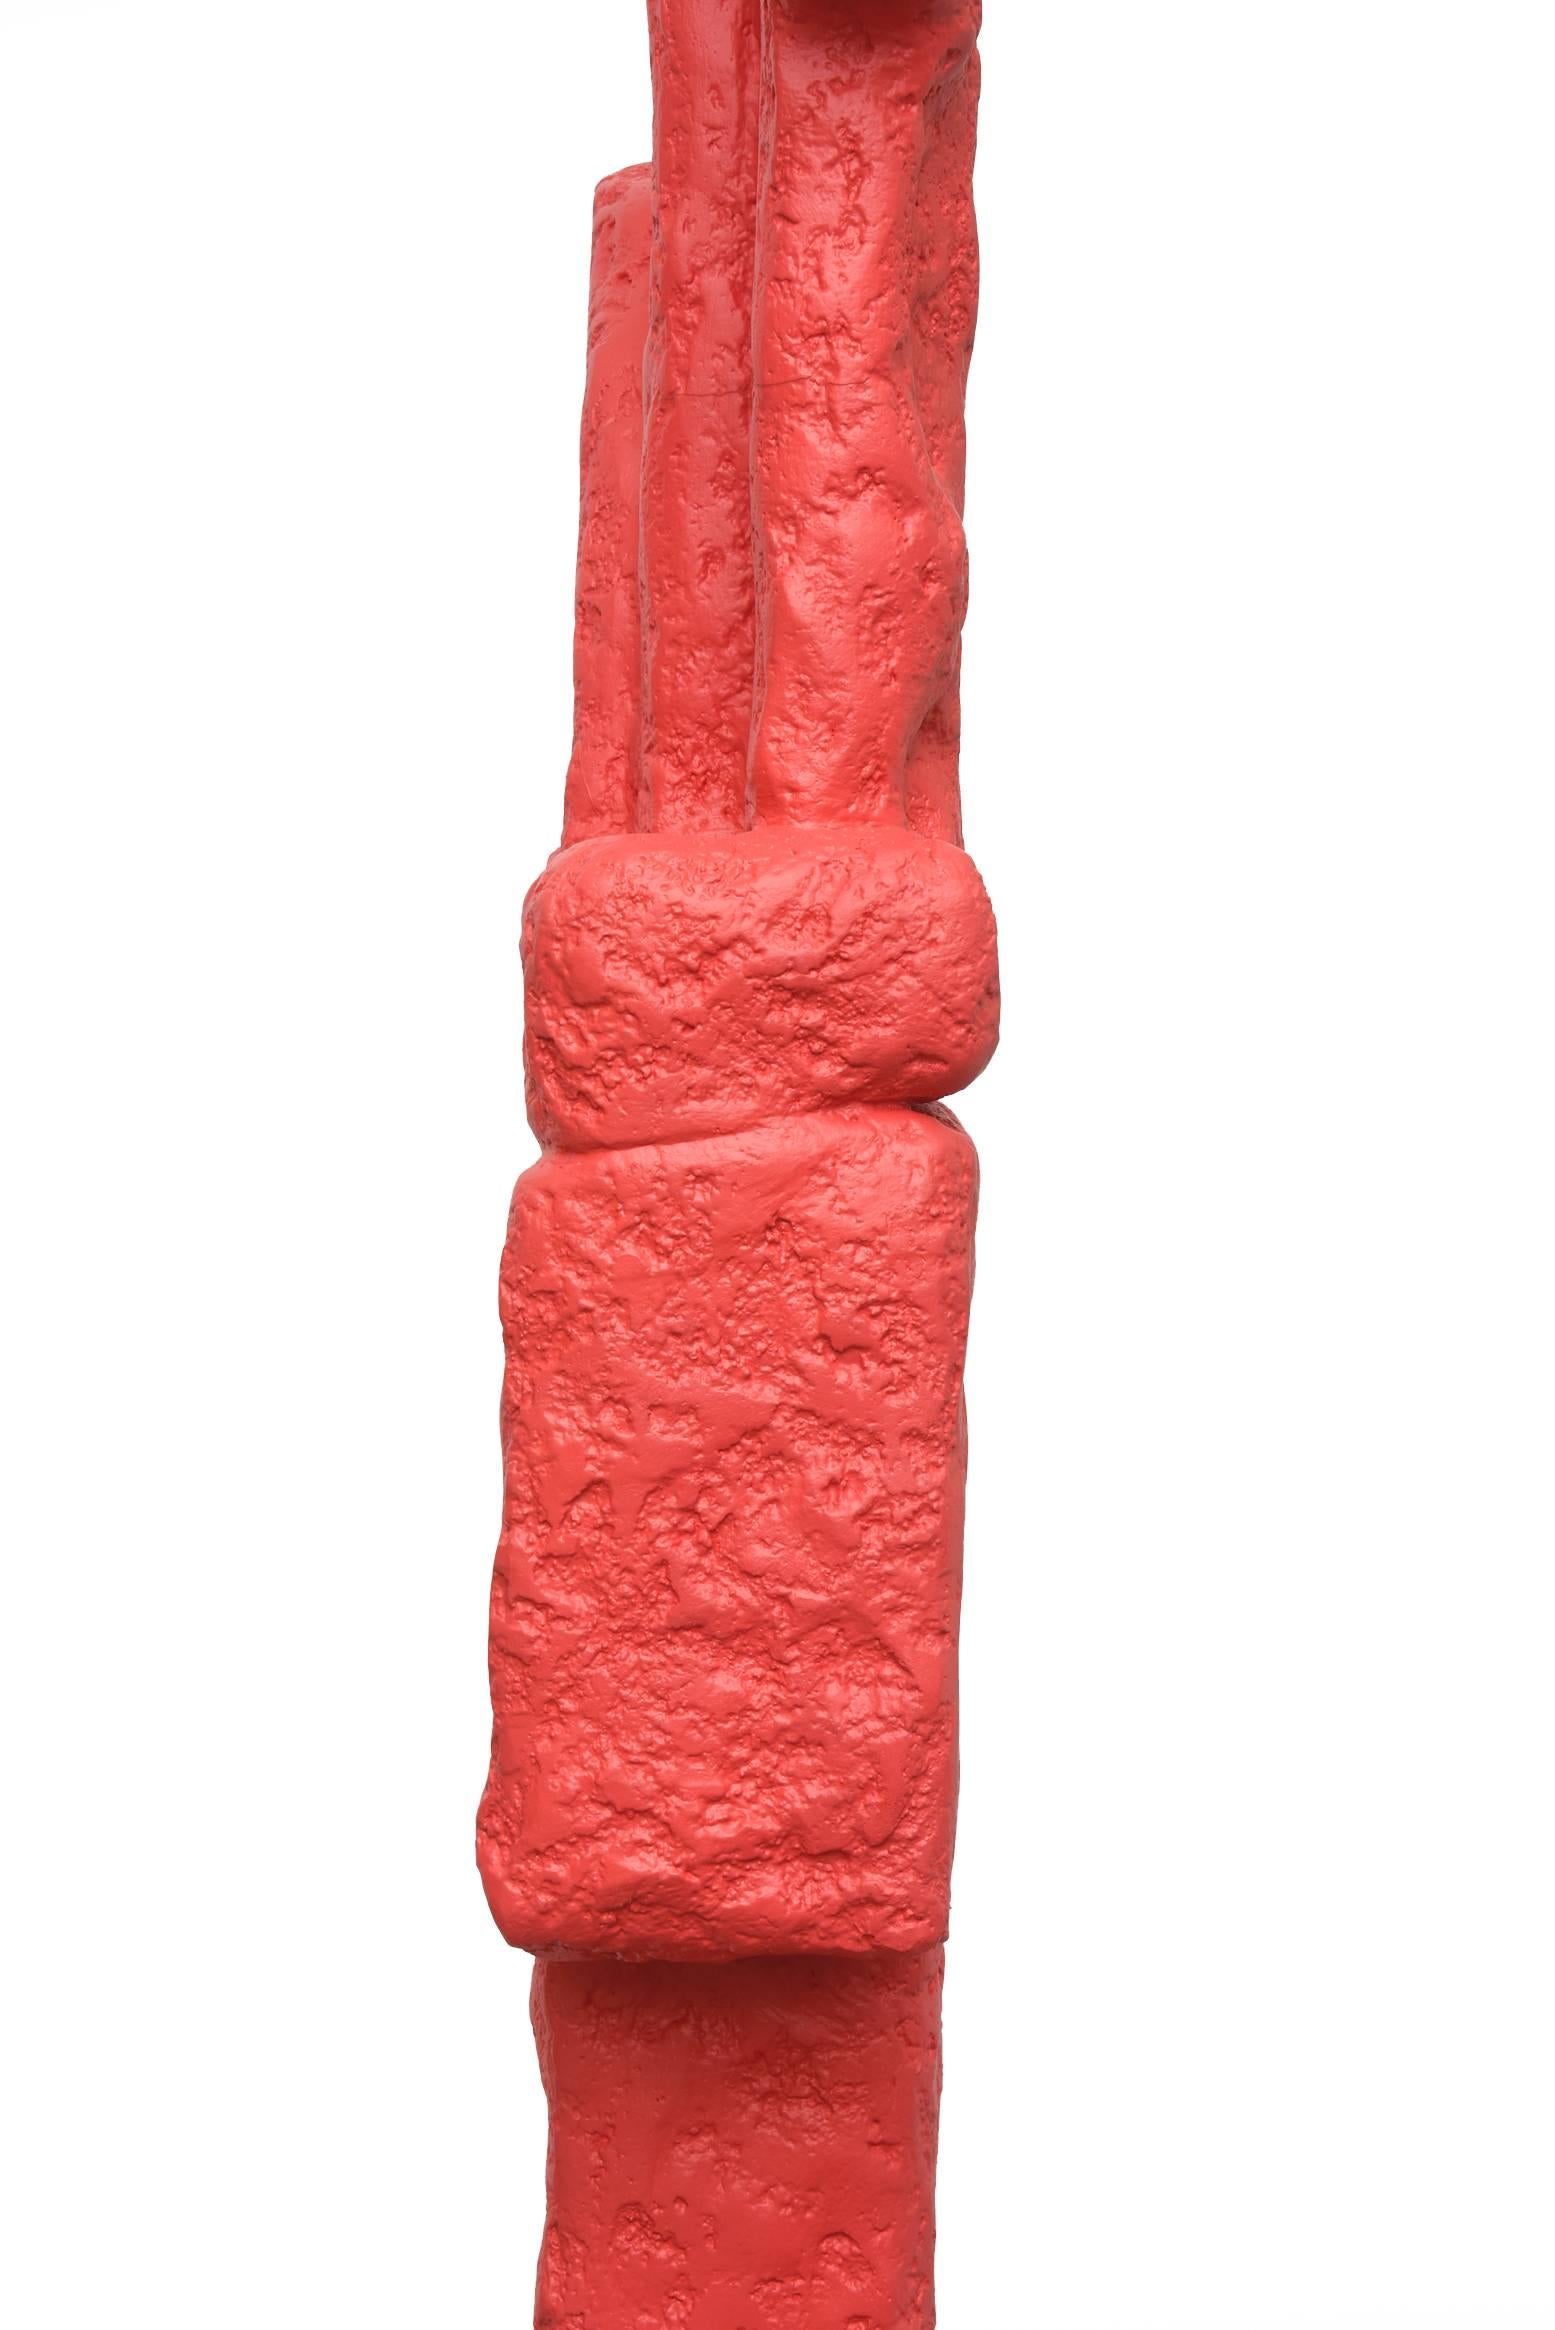 Late 20th Century Plaster of Paris and Resin Red Abstract Totem Floor Indoor Sculpture For Sale